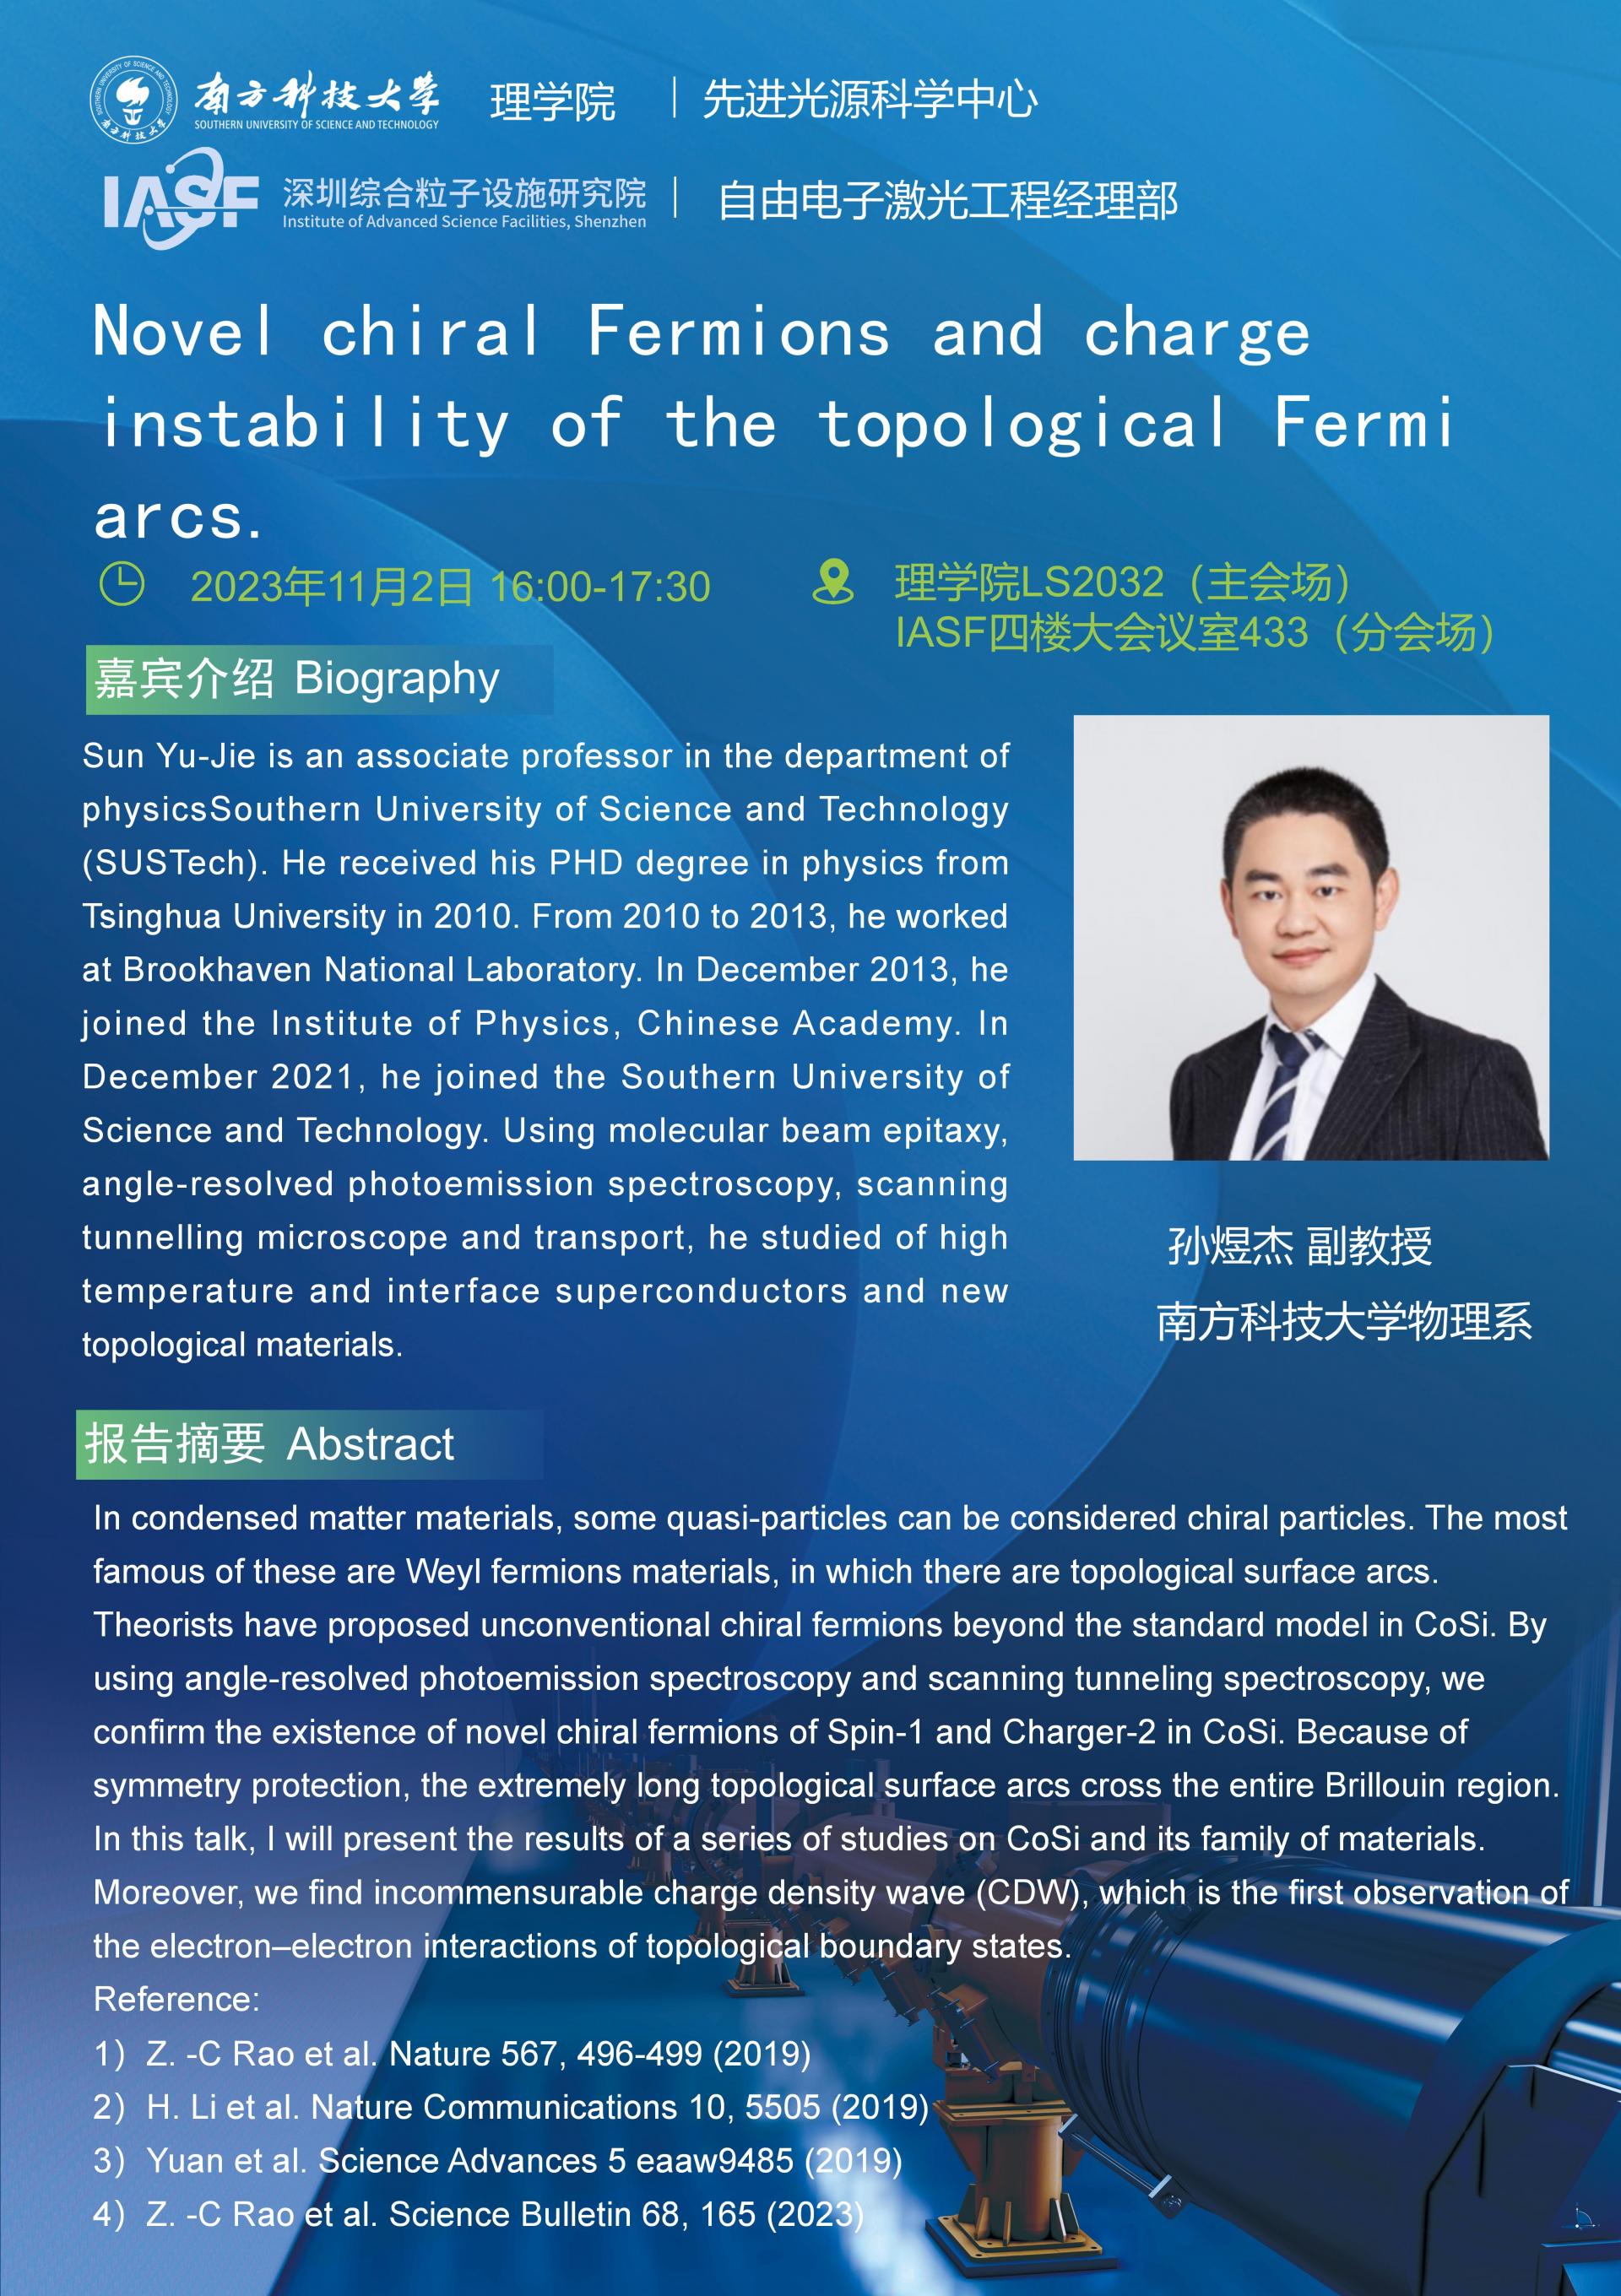 SYJ-Novel chiral Fermions and charge instability of the topological Fermi arcs-南科大粒子院联合报告_01.jpg